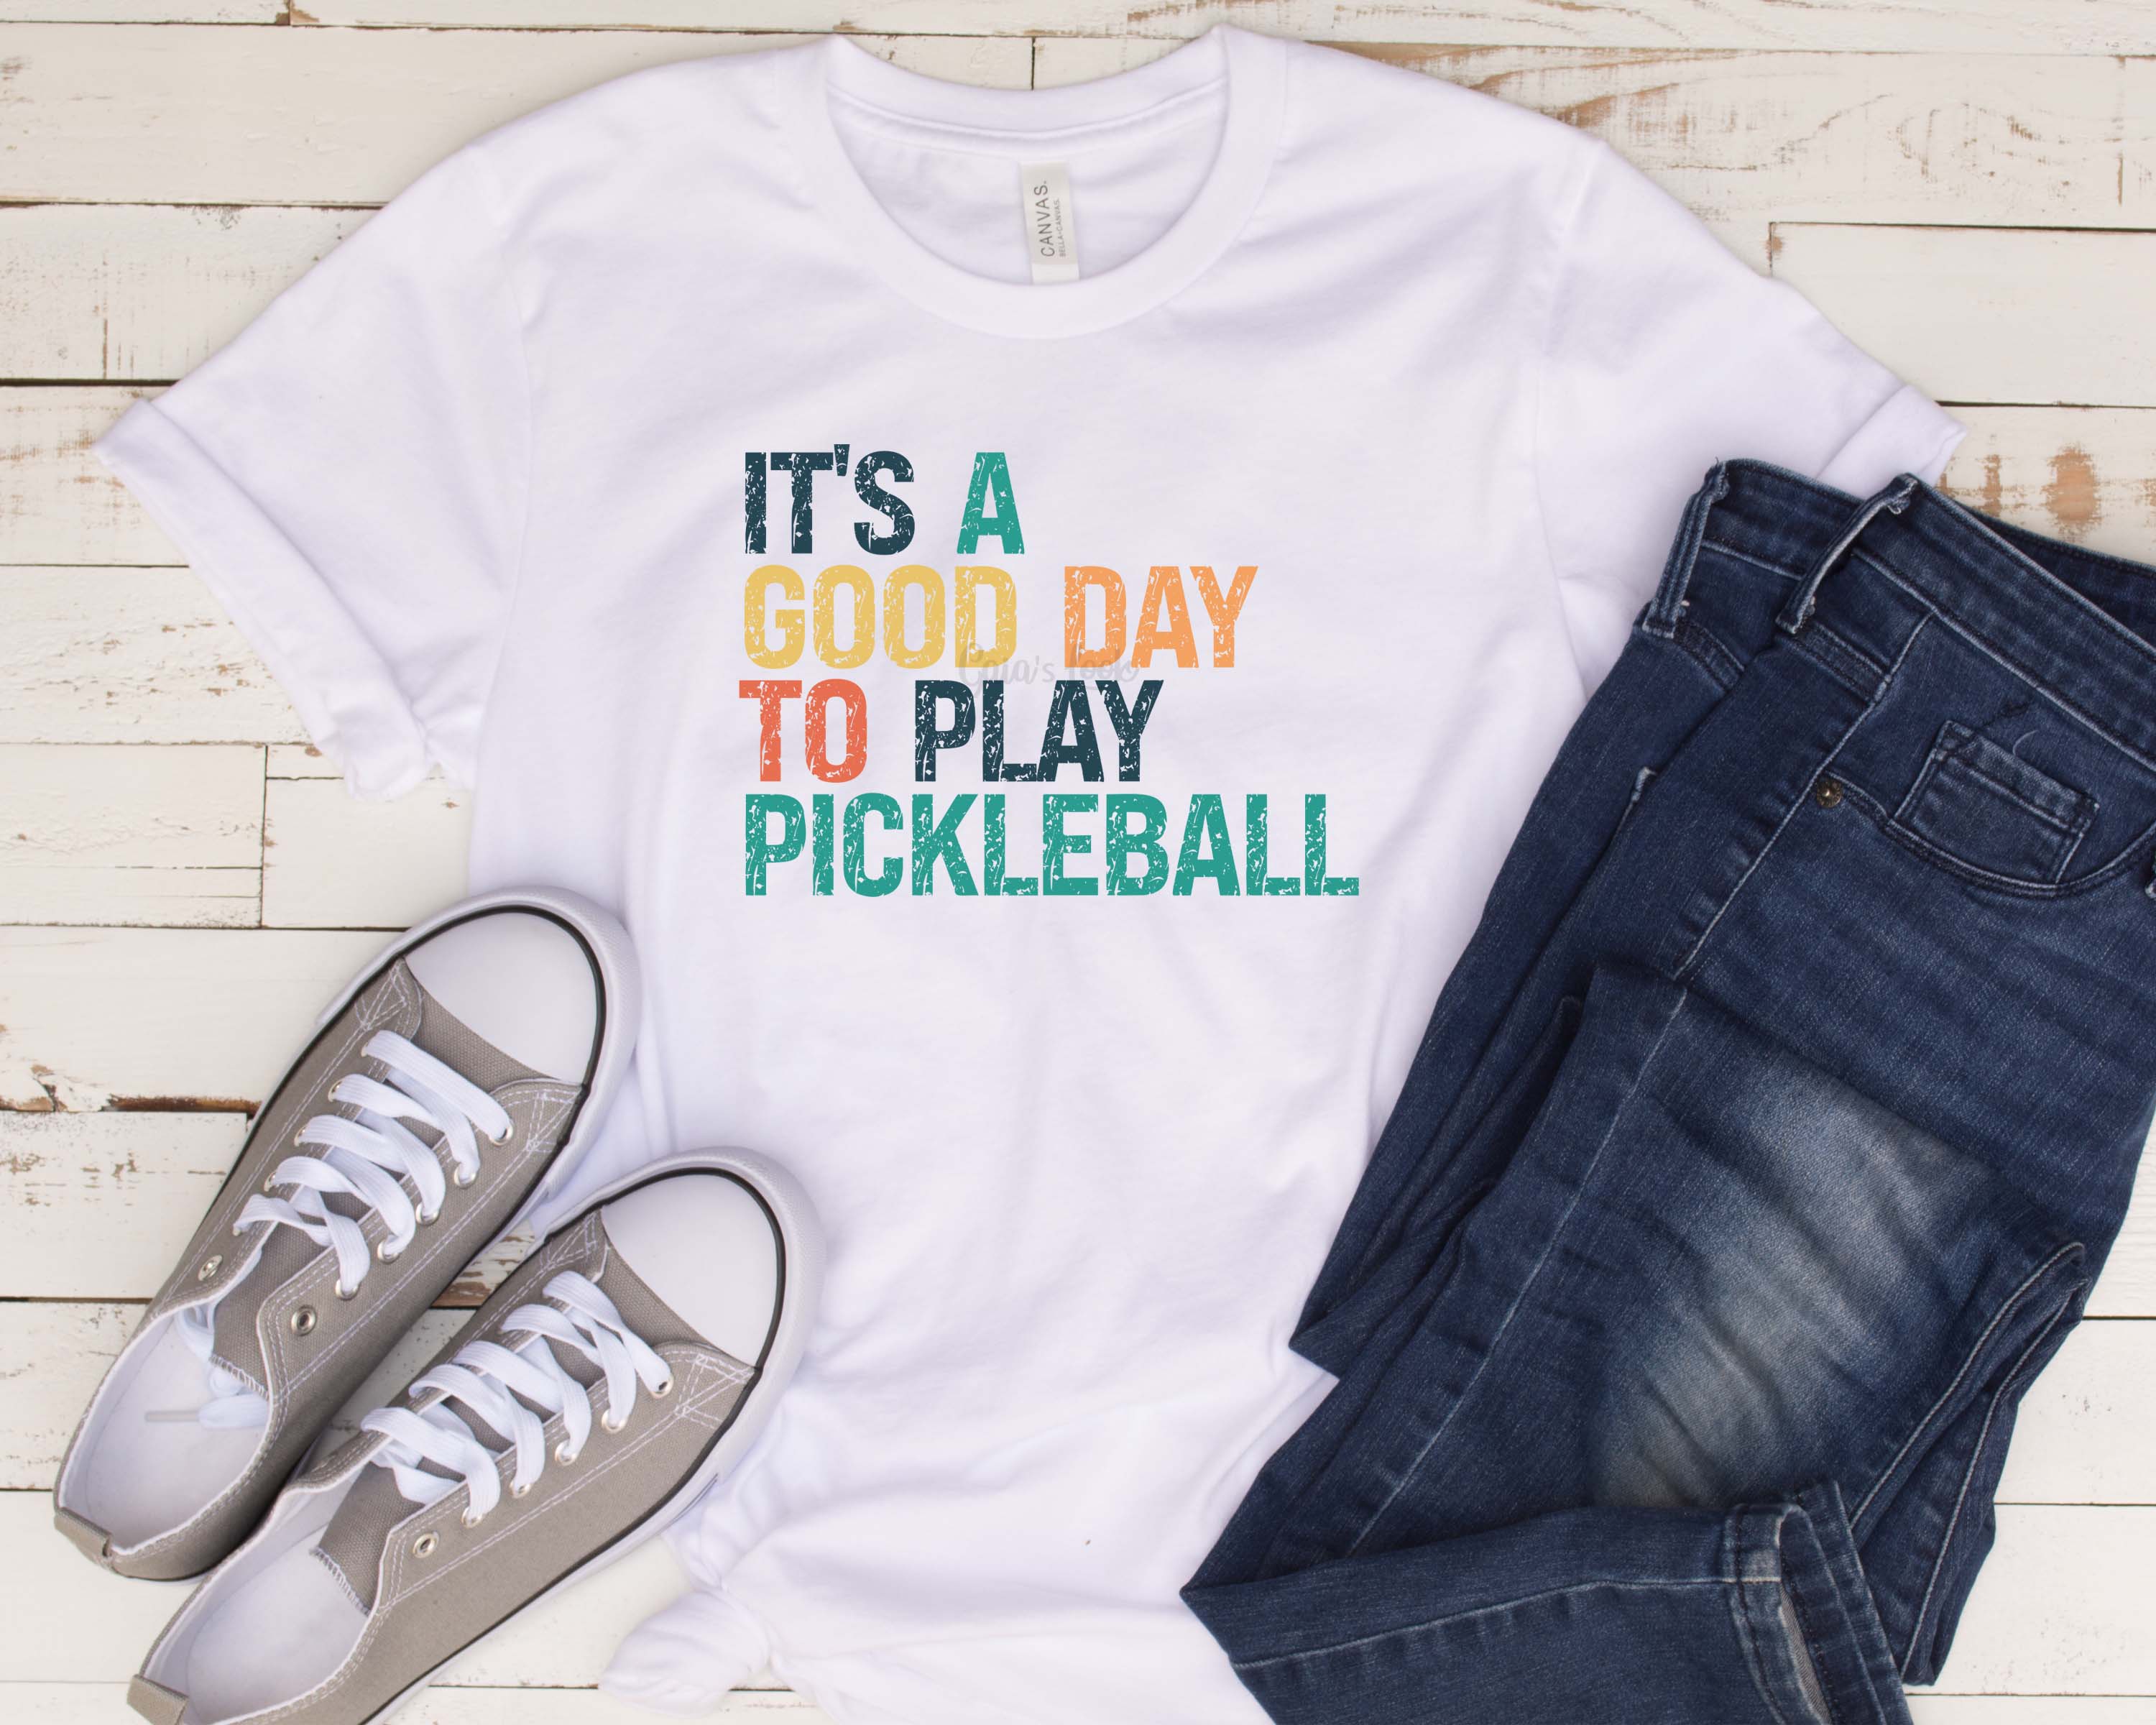 It's a good day to play pickleball white shirt